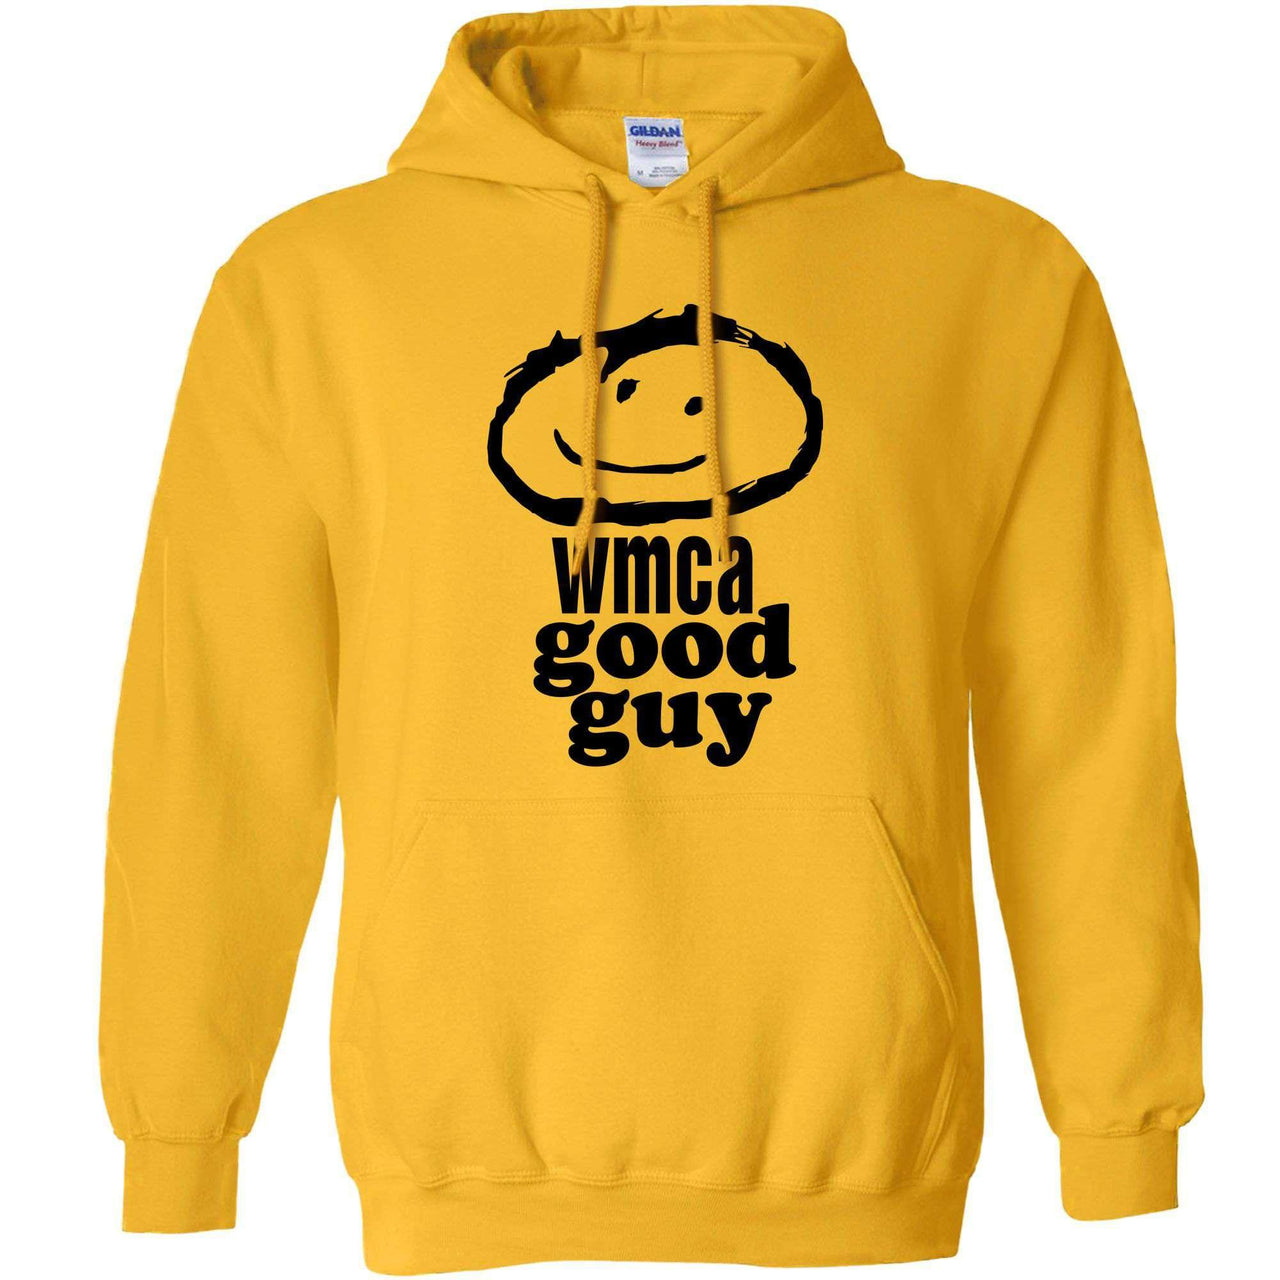 WMCA Good Guy Graphic Hoodie As Worn By Mick Jagger 8Ball